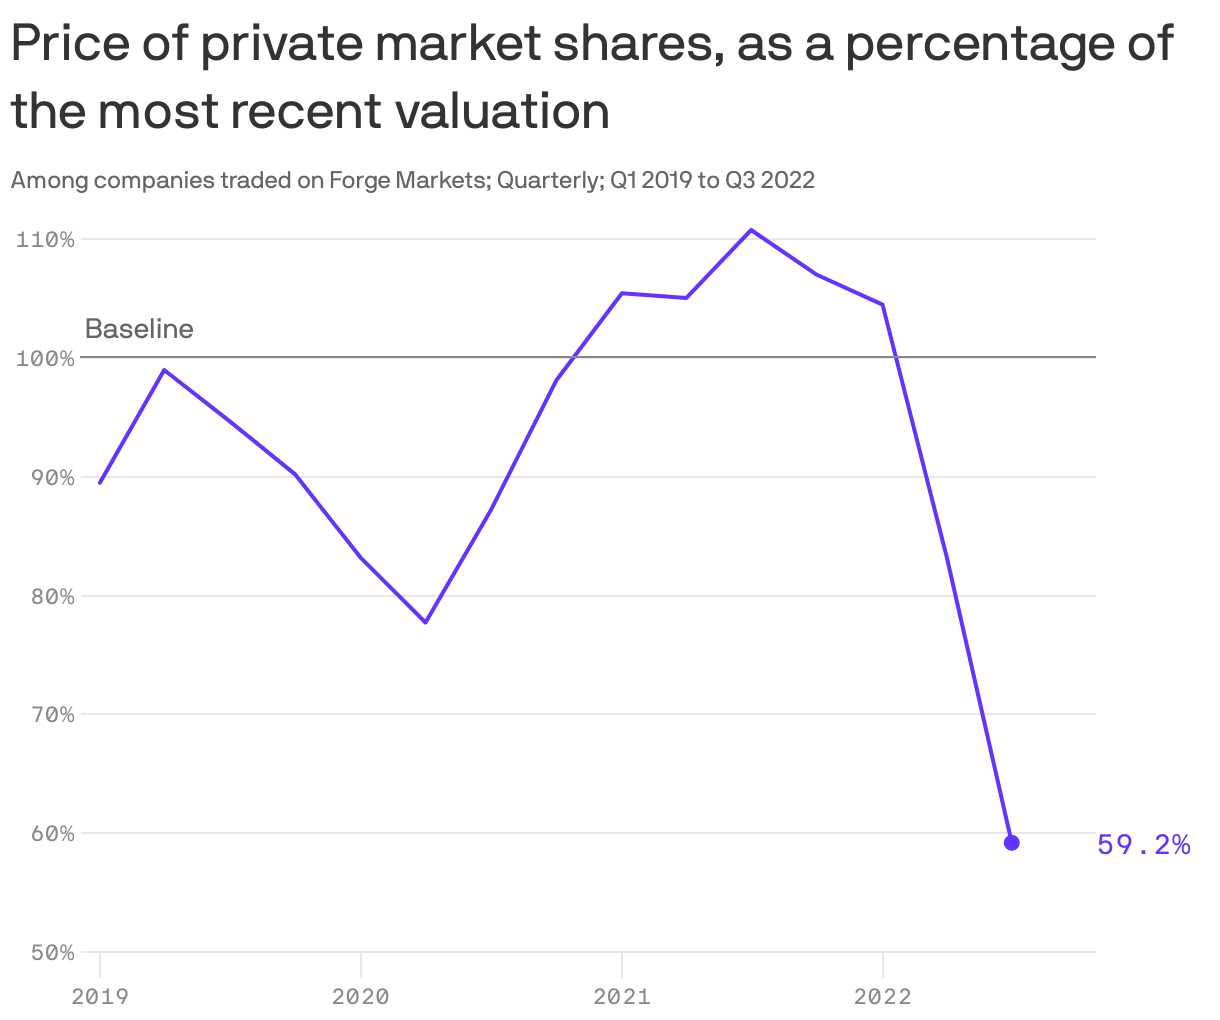 Price of private market shares, as a percentage of the most recent valuation